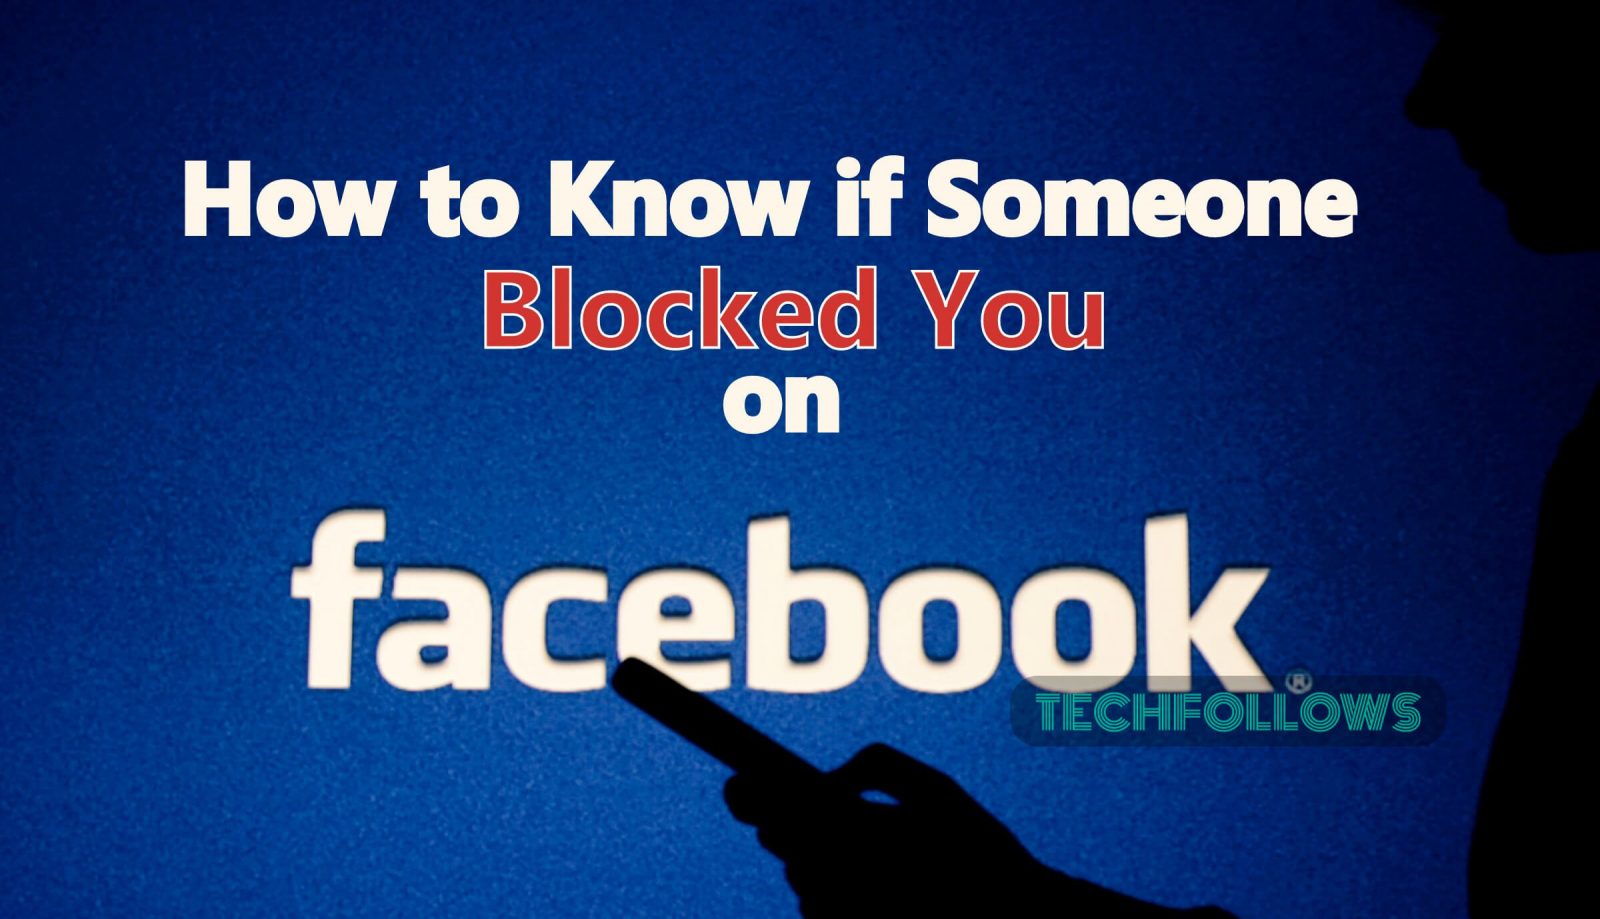 How to Know if Someone Blocked You on Facebook (1)